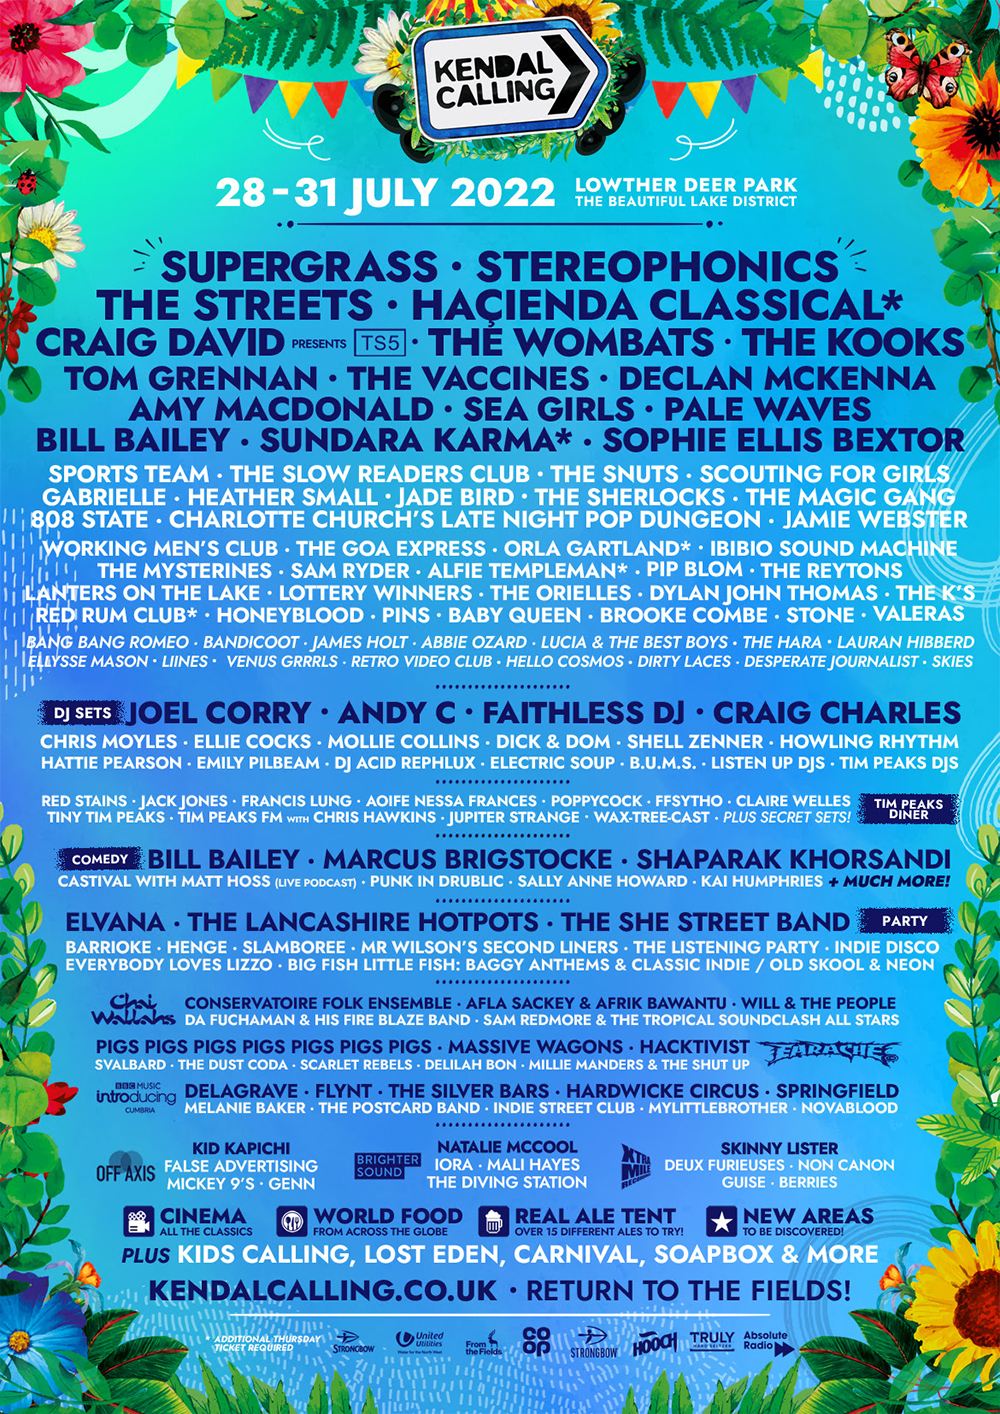 Kendal Calling 🦌 on X: Kendal Calling returns to the fields! Our first  wave has landed 🙌 Join Supergrass, Stereophonics, The Streets, Dizzee and  SO much more still to come! RT and @